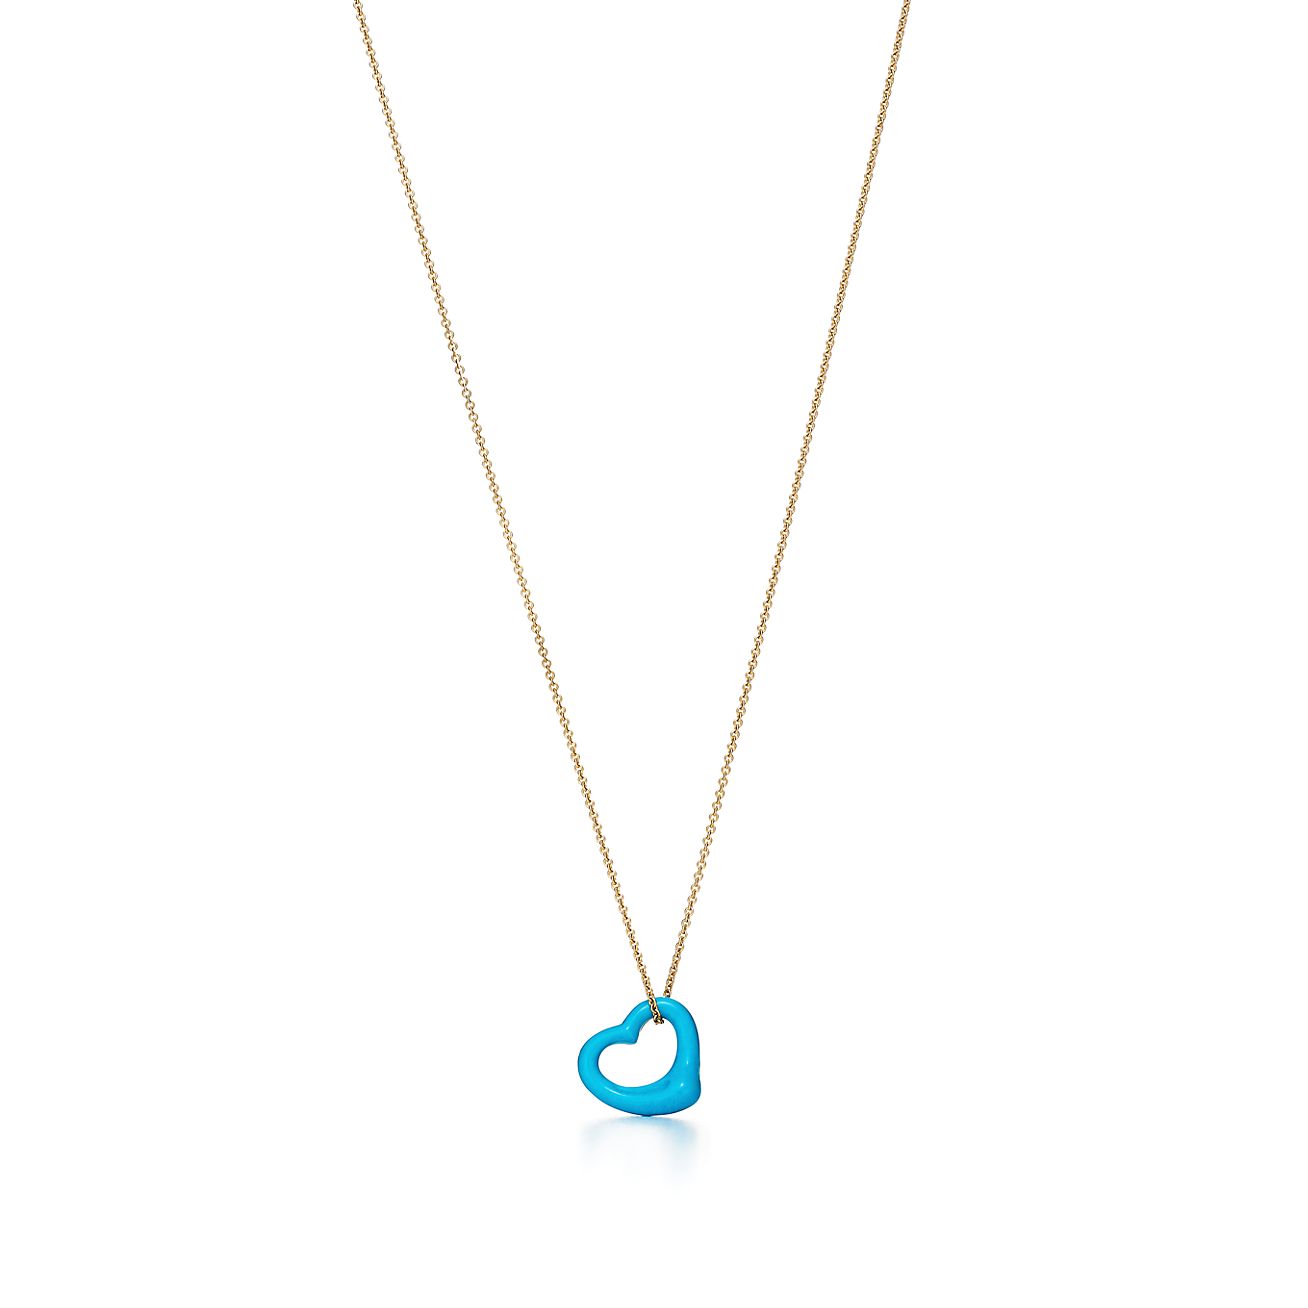 tiffany turquoise heart necklace